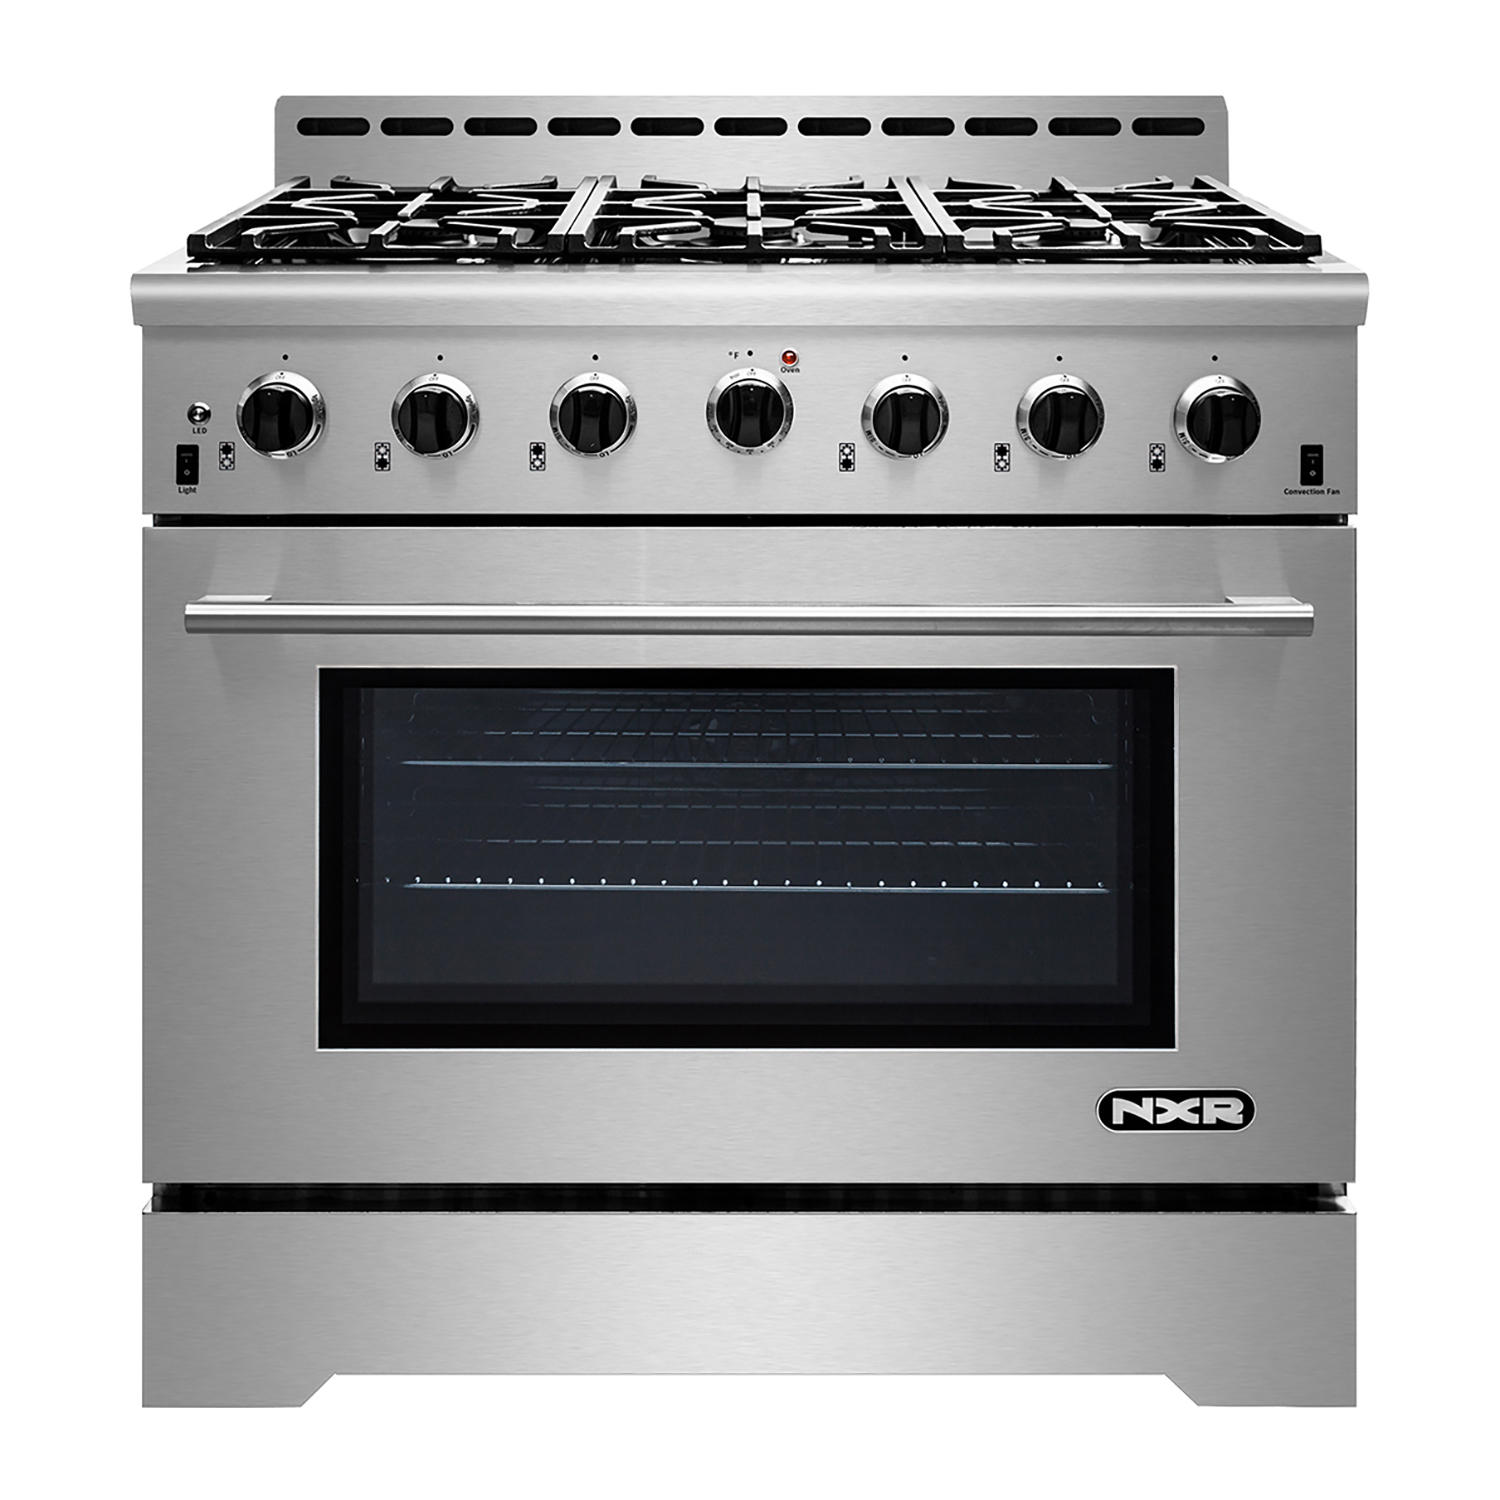 NXR Stainless Steel 36″ Gas Range with LED